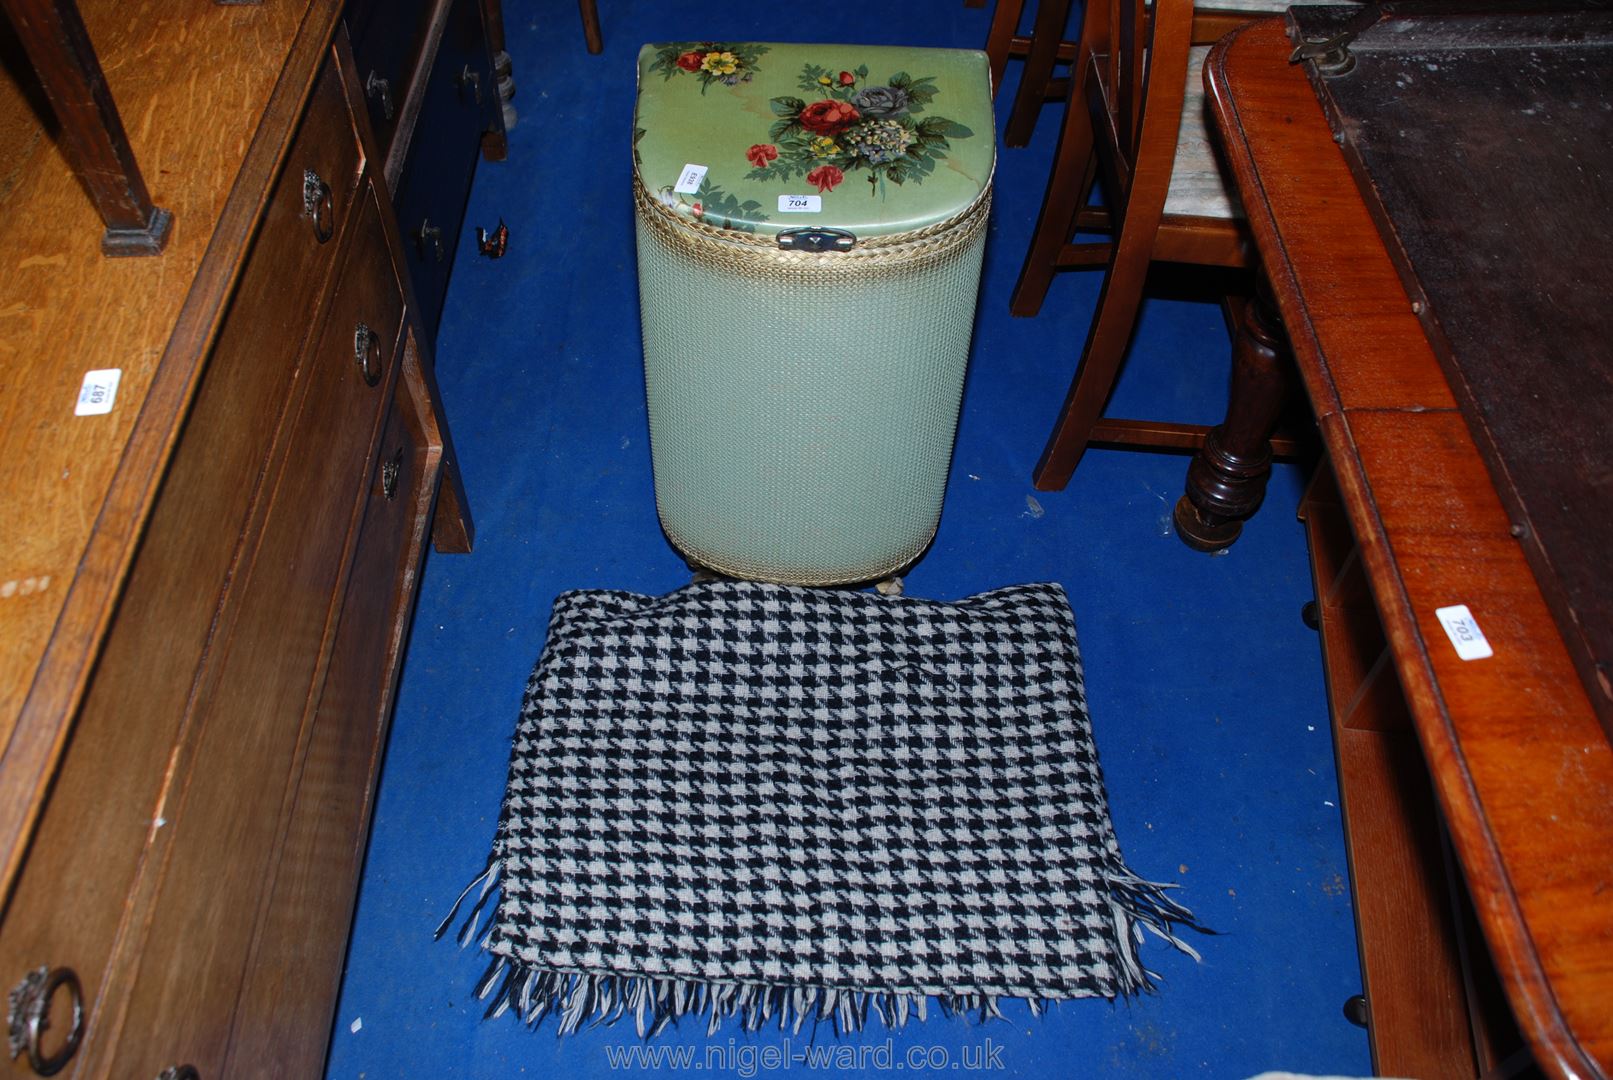 A Lloyd Loom style linen basket and a check-patterned throw.